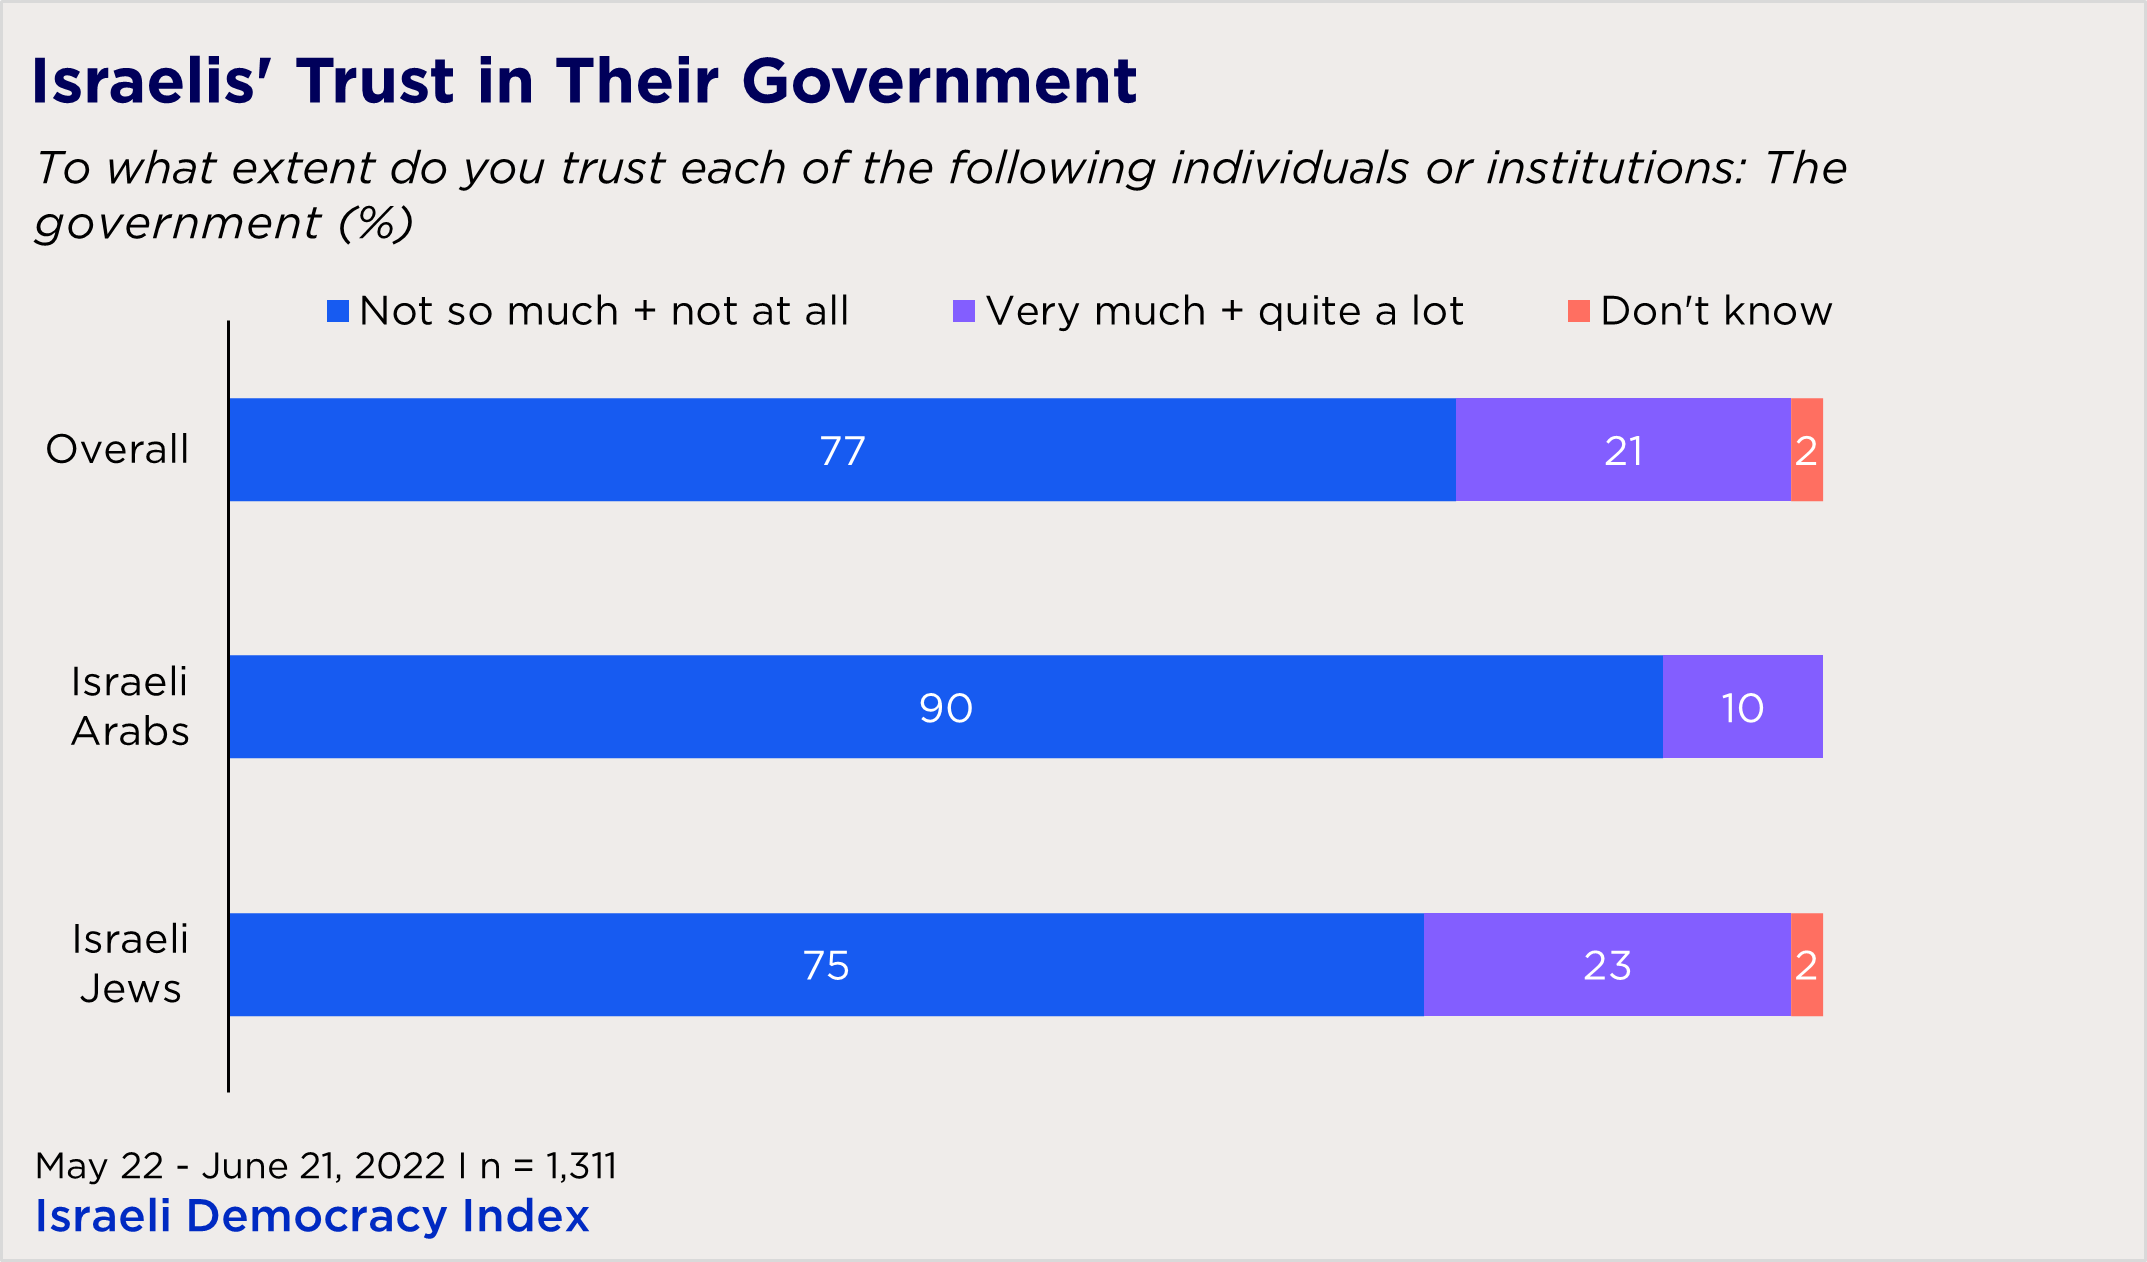 "bar chart showing Israelis' trust in their government"